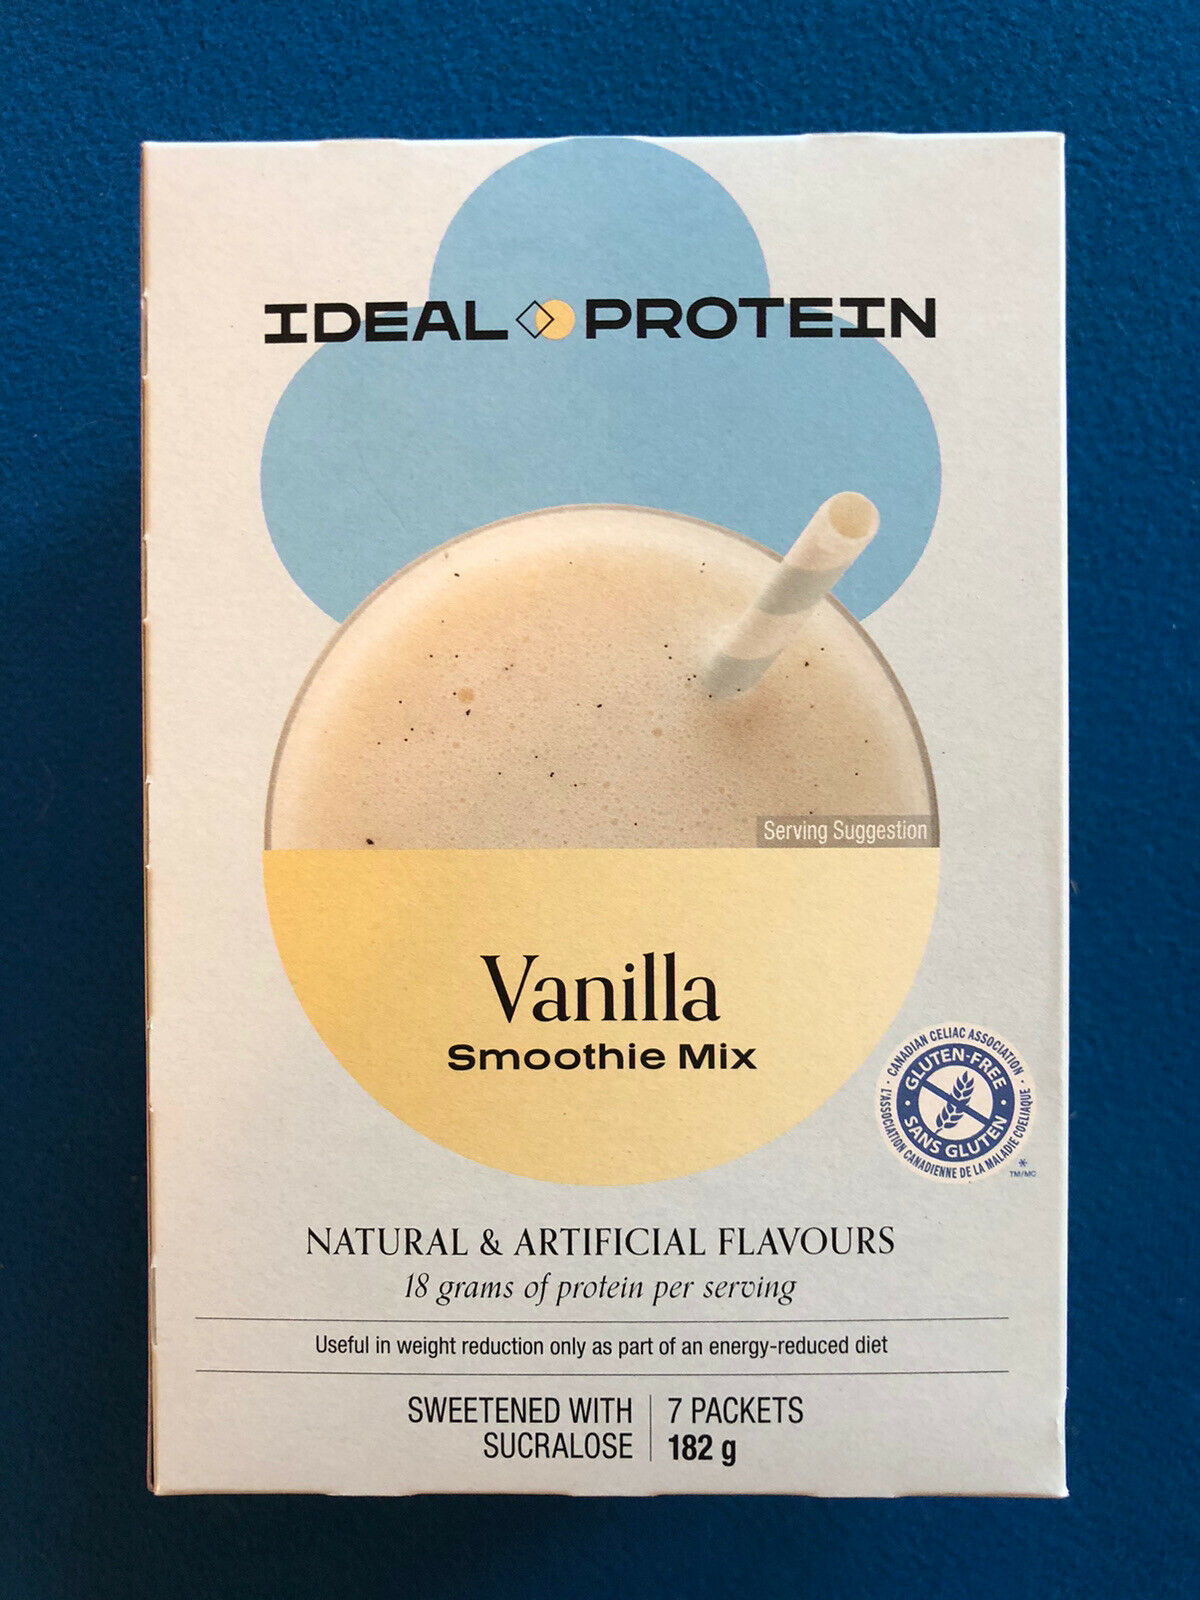 Ideal Protein Vanilla Smoothie Mix - 7 Packets - Exp 4/30/22 - Free Shipping!